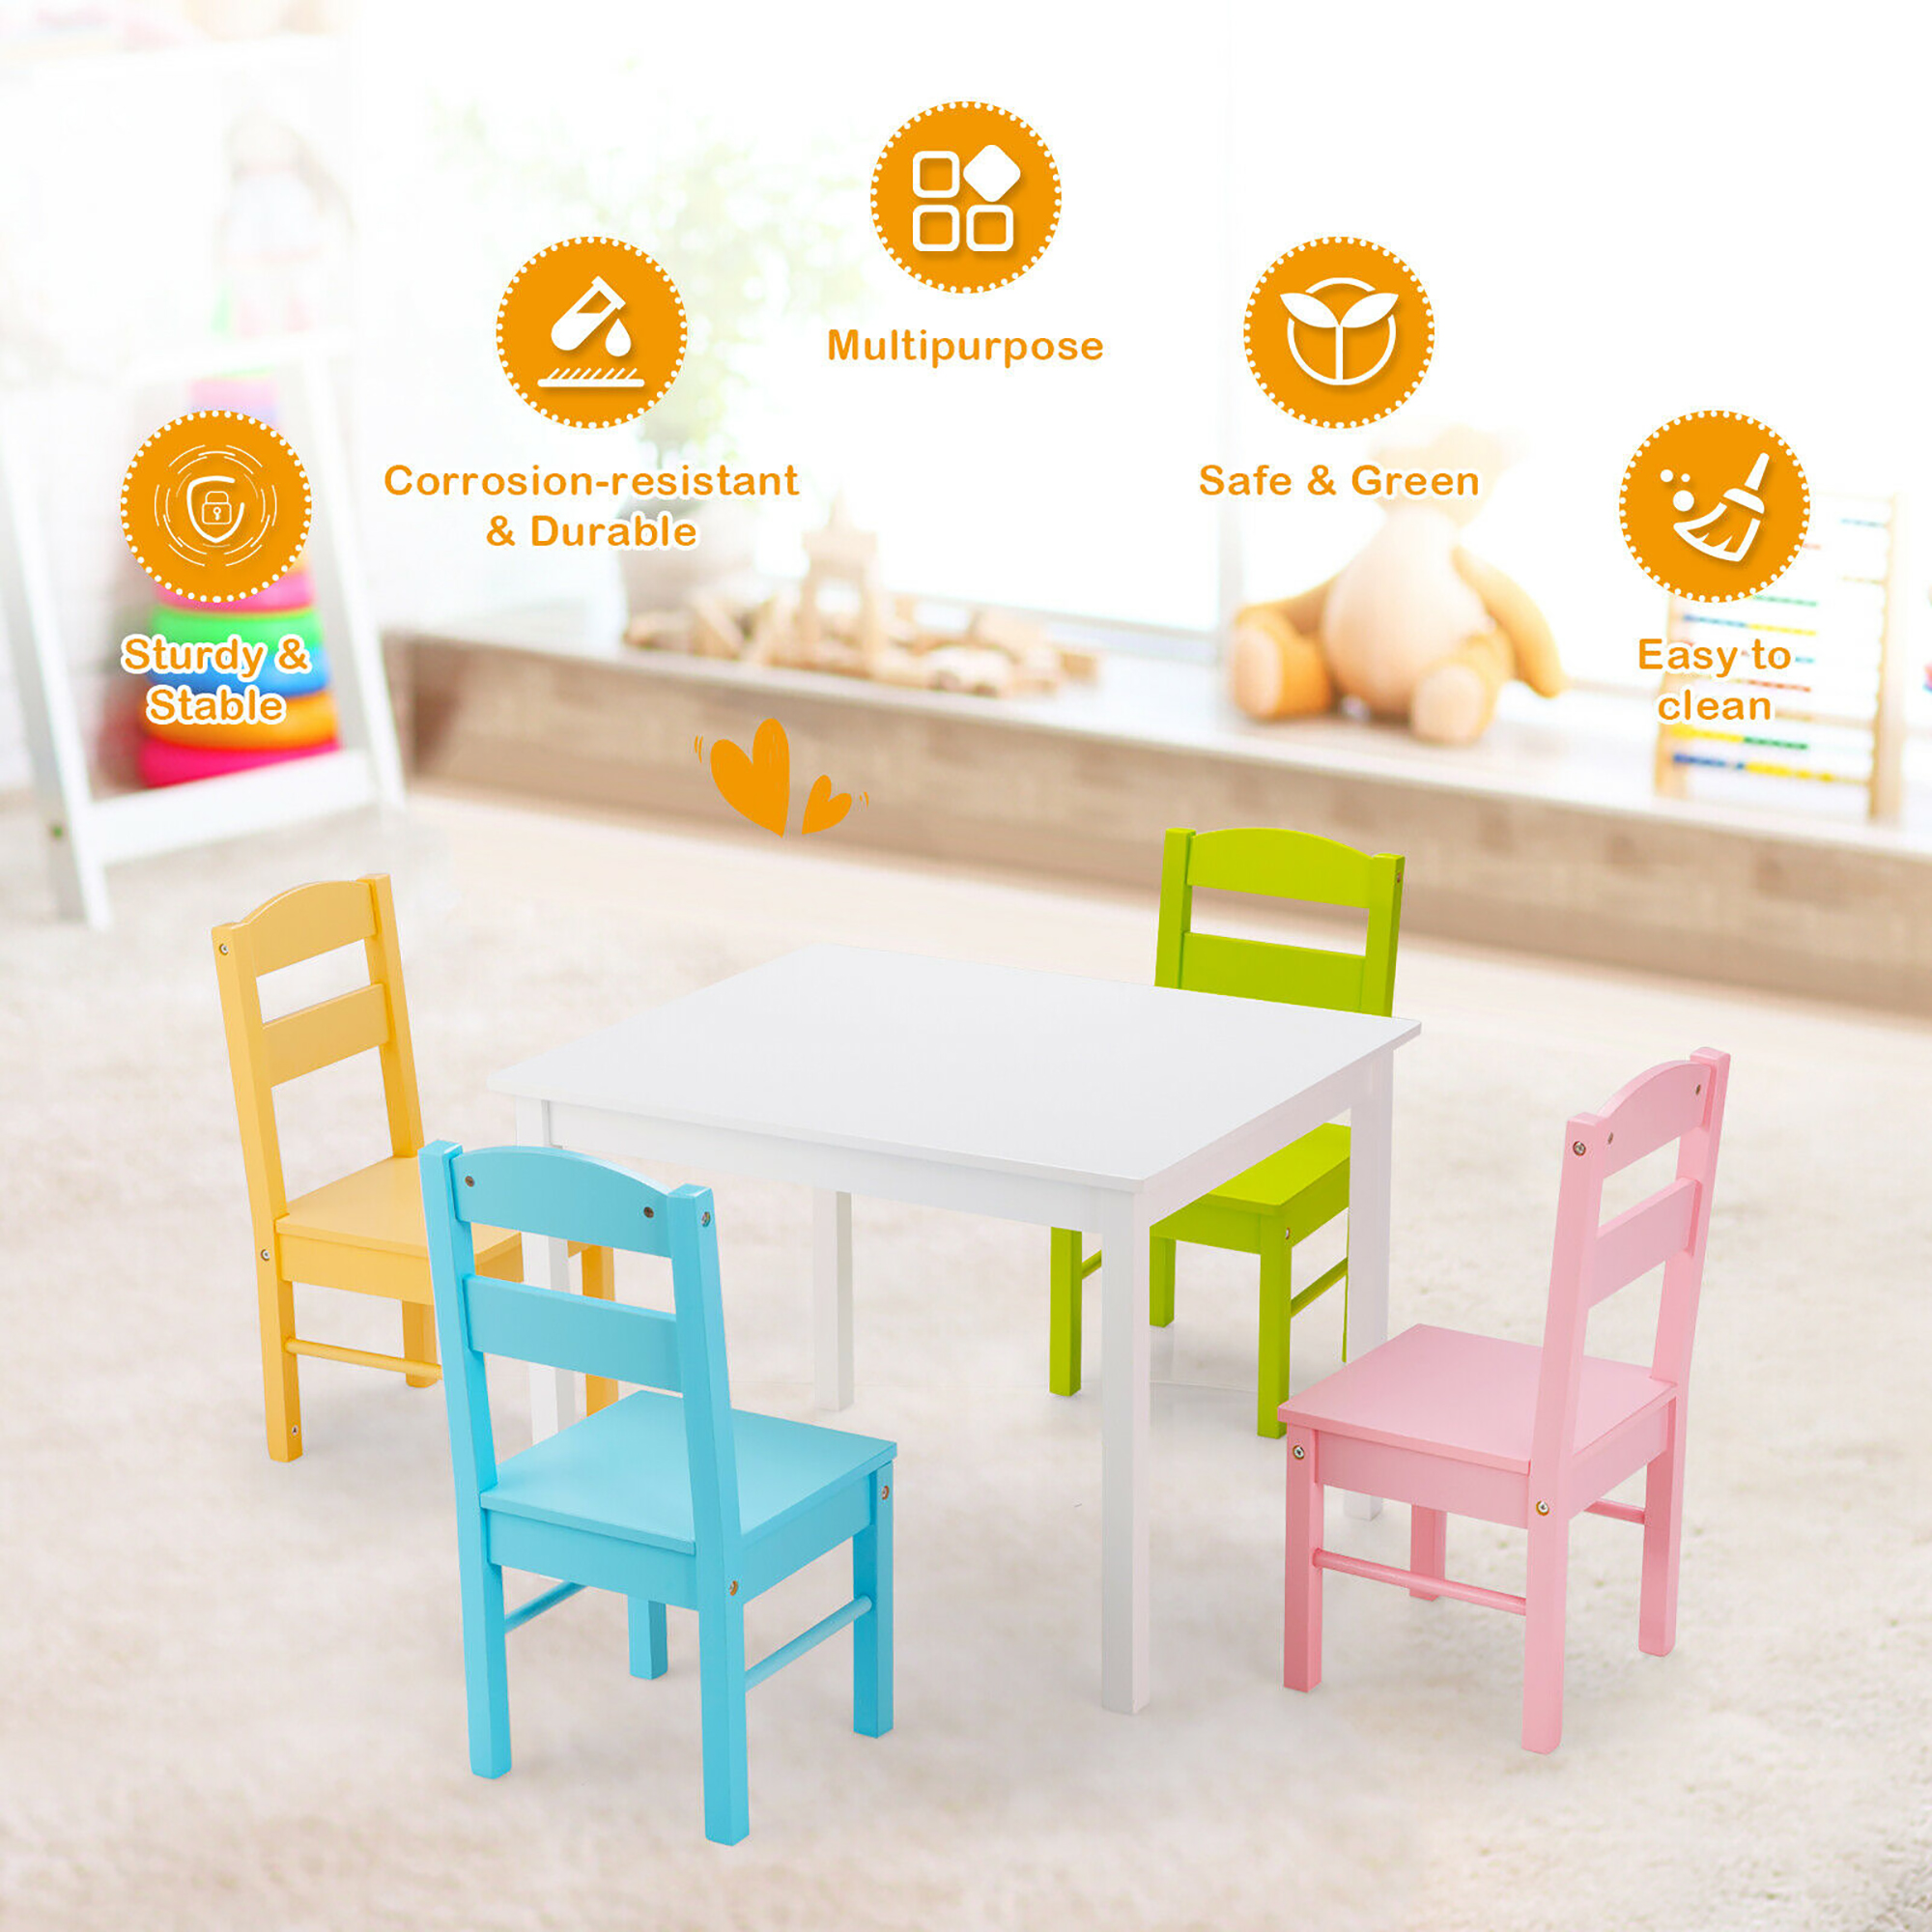 Costway 5 Piece Kids Wood Table Chair Set Activity Toddler Playroom Furniture Colorful